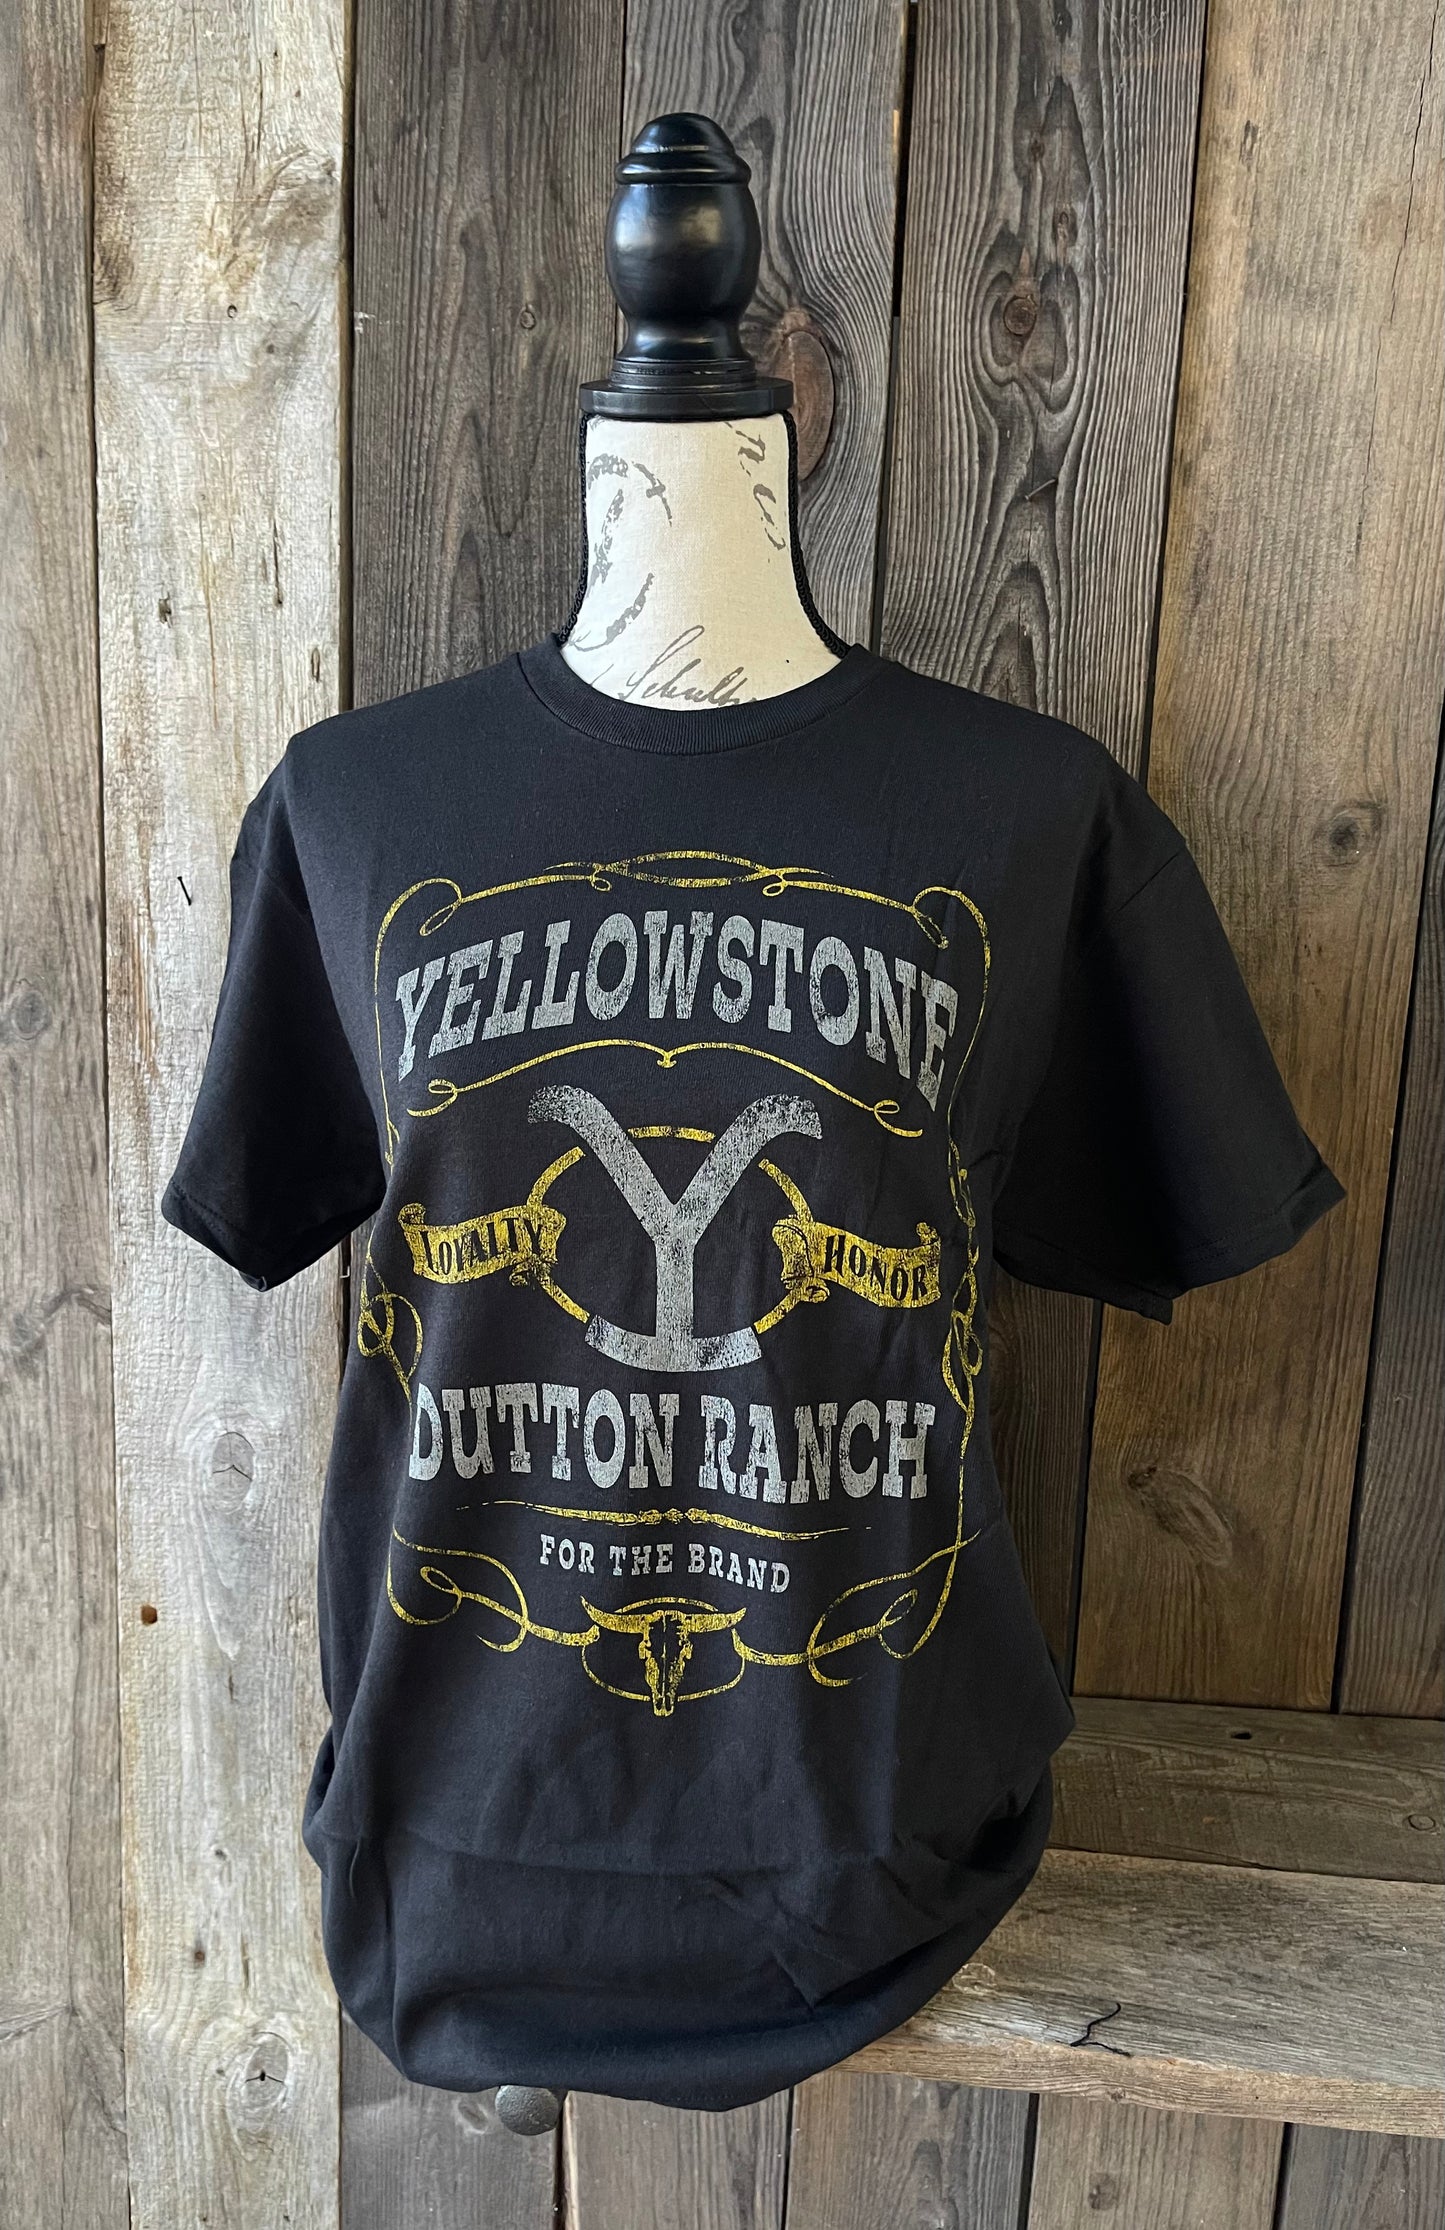 Yellowstone Dutton Ranch Loyalty Honor Graphic Tee